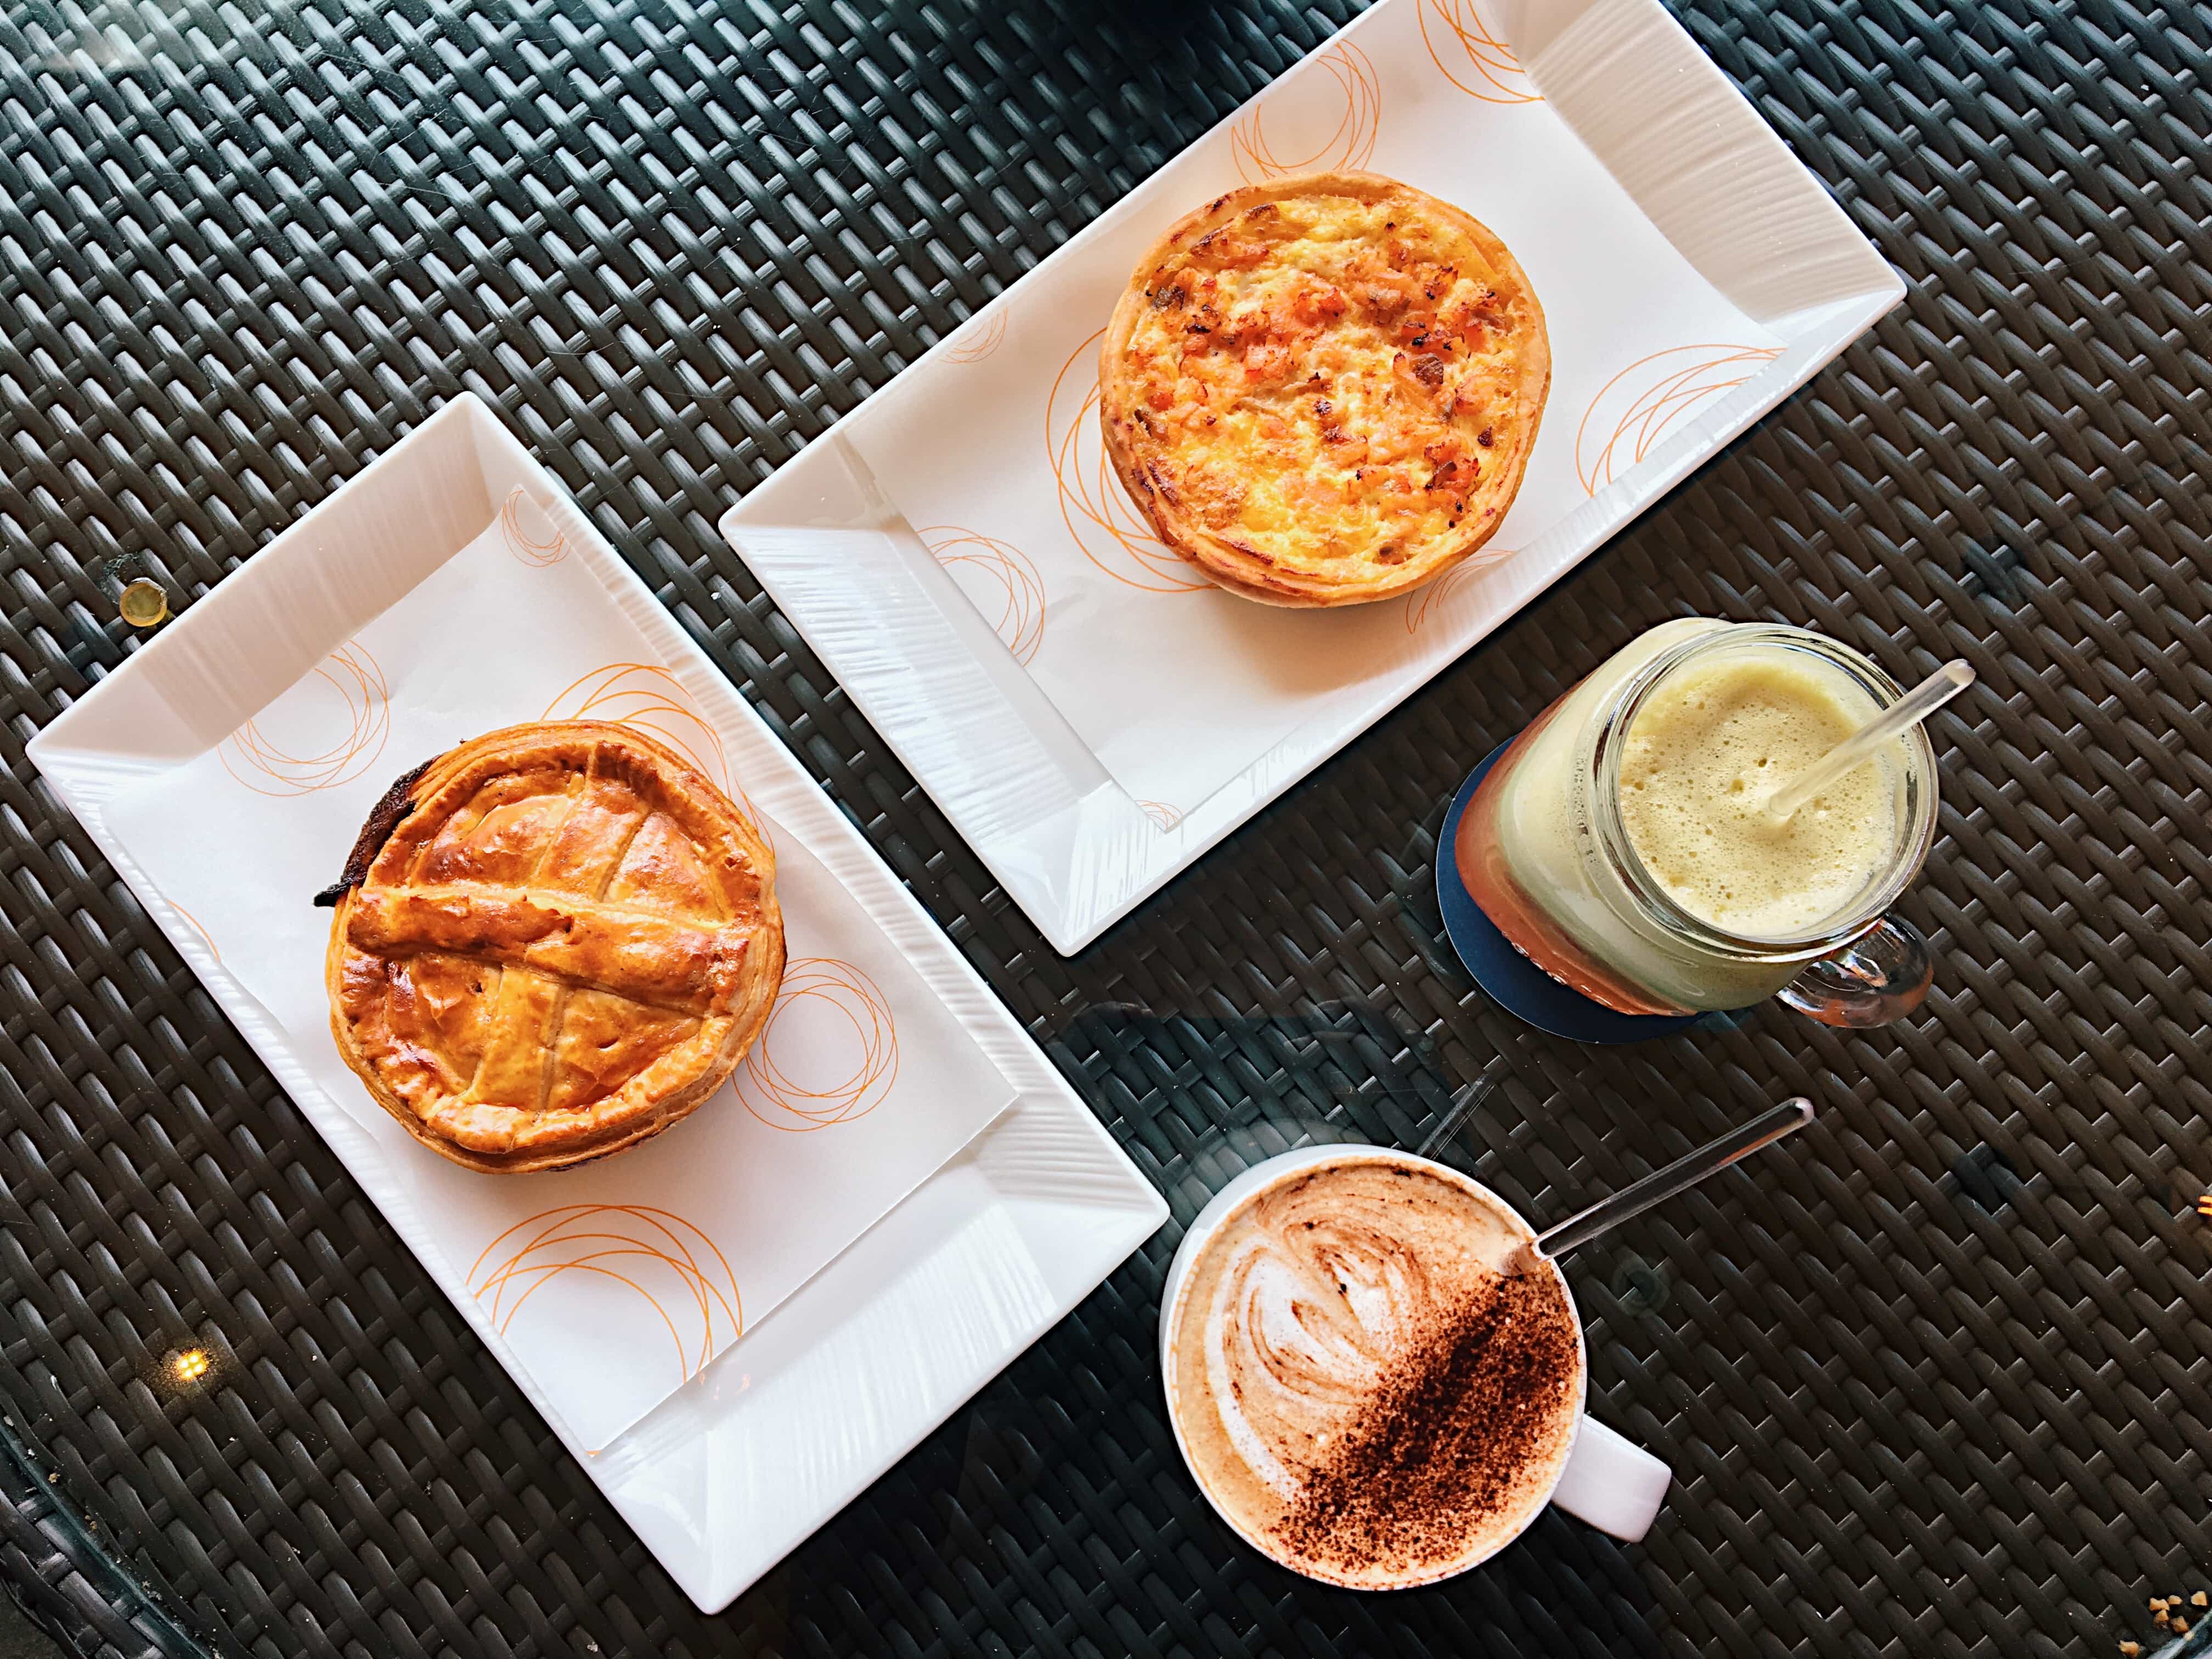 Pie, coffee and smoothie in the great Kuala Lumpur experience